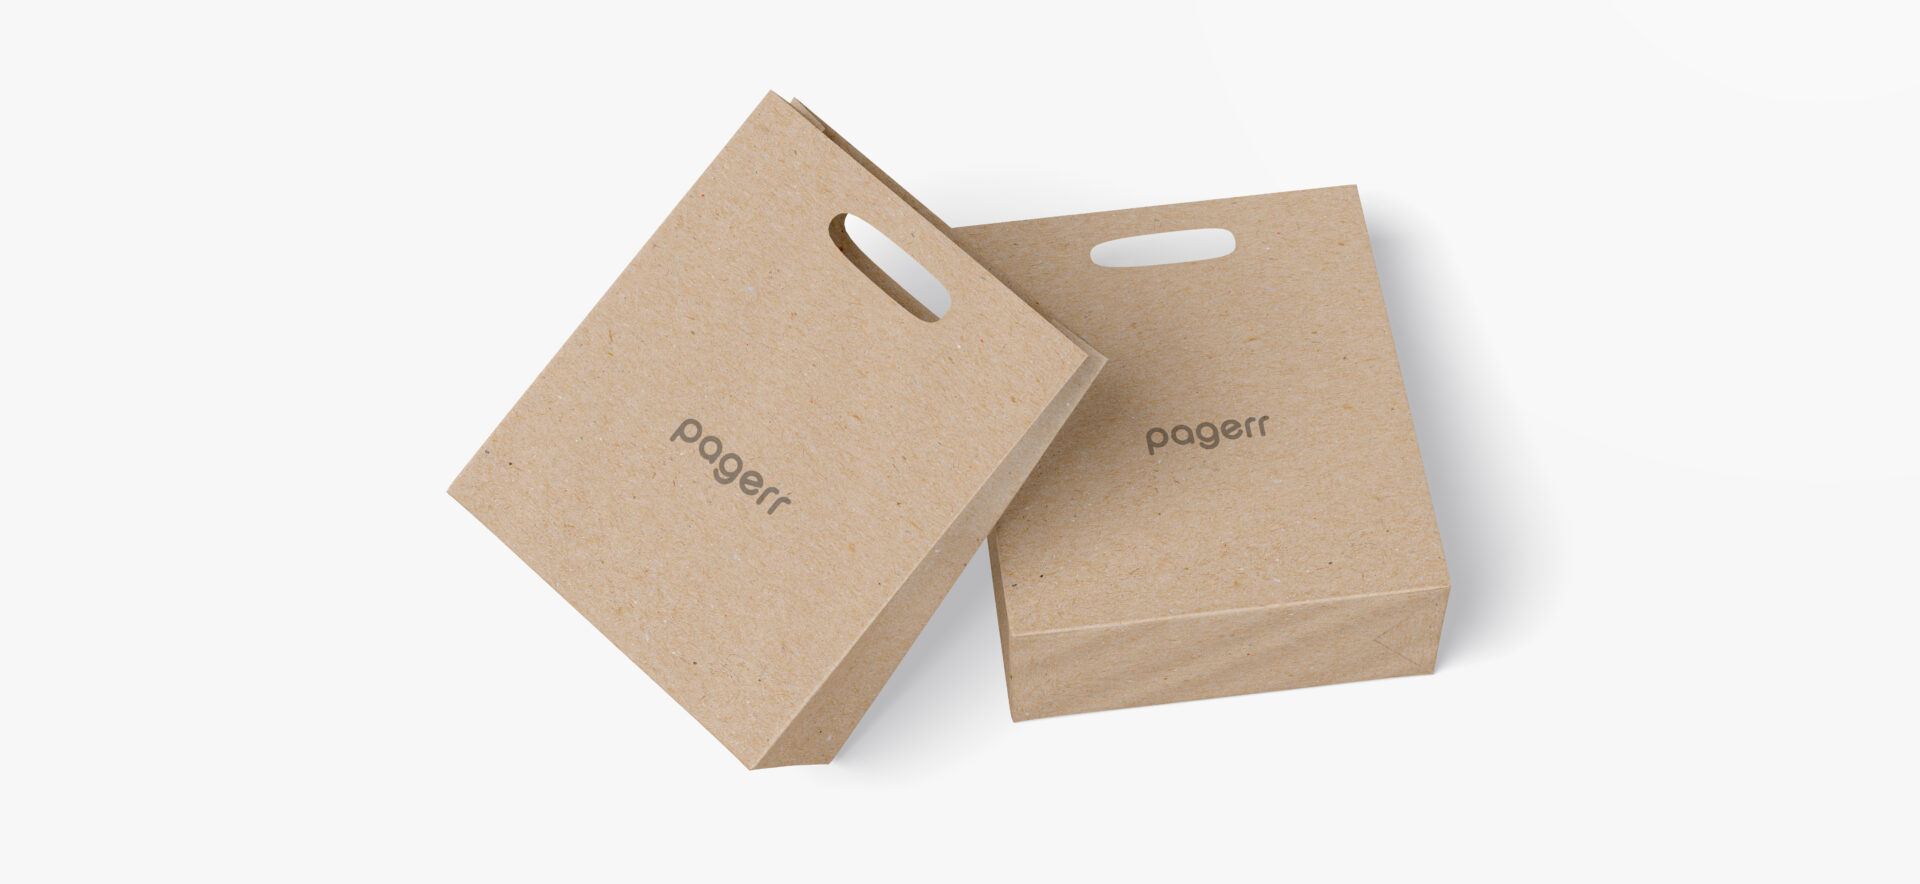 Takeaway bags in Perth - Print with Pagerr